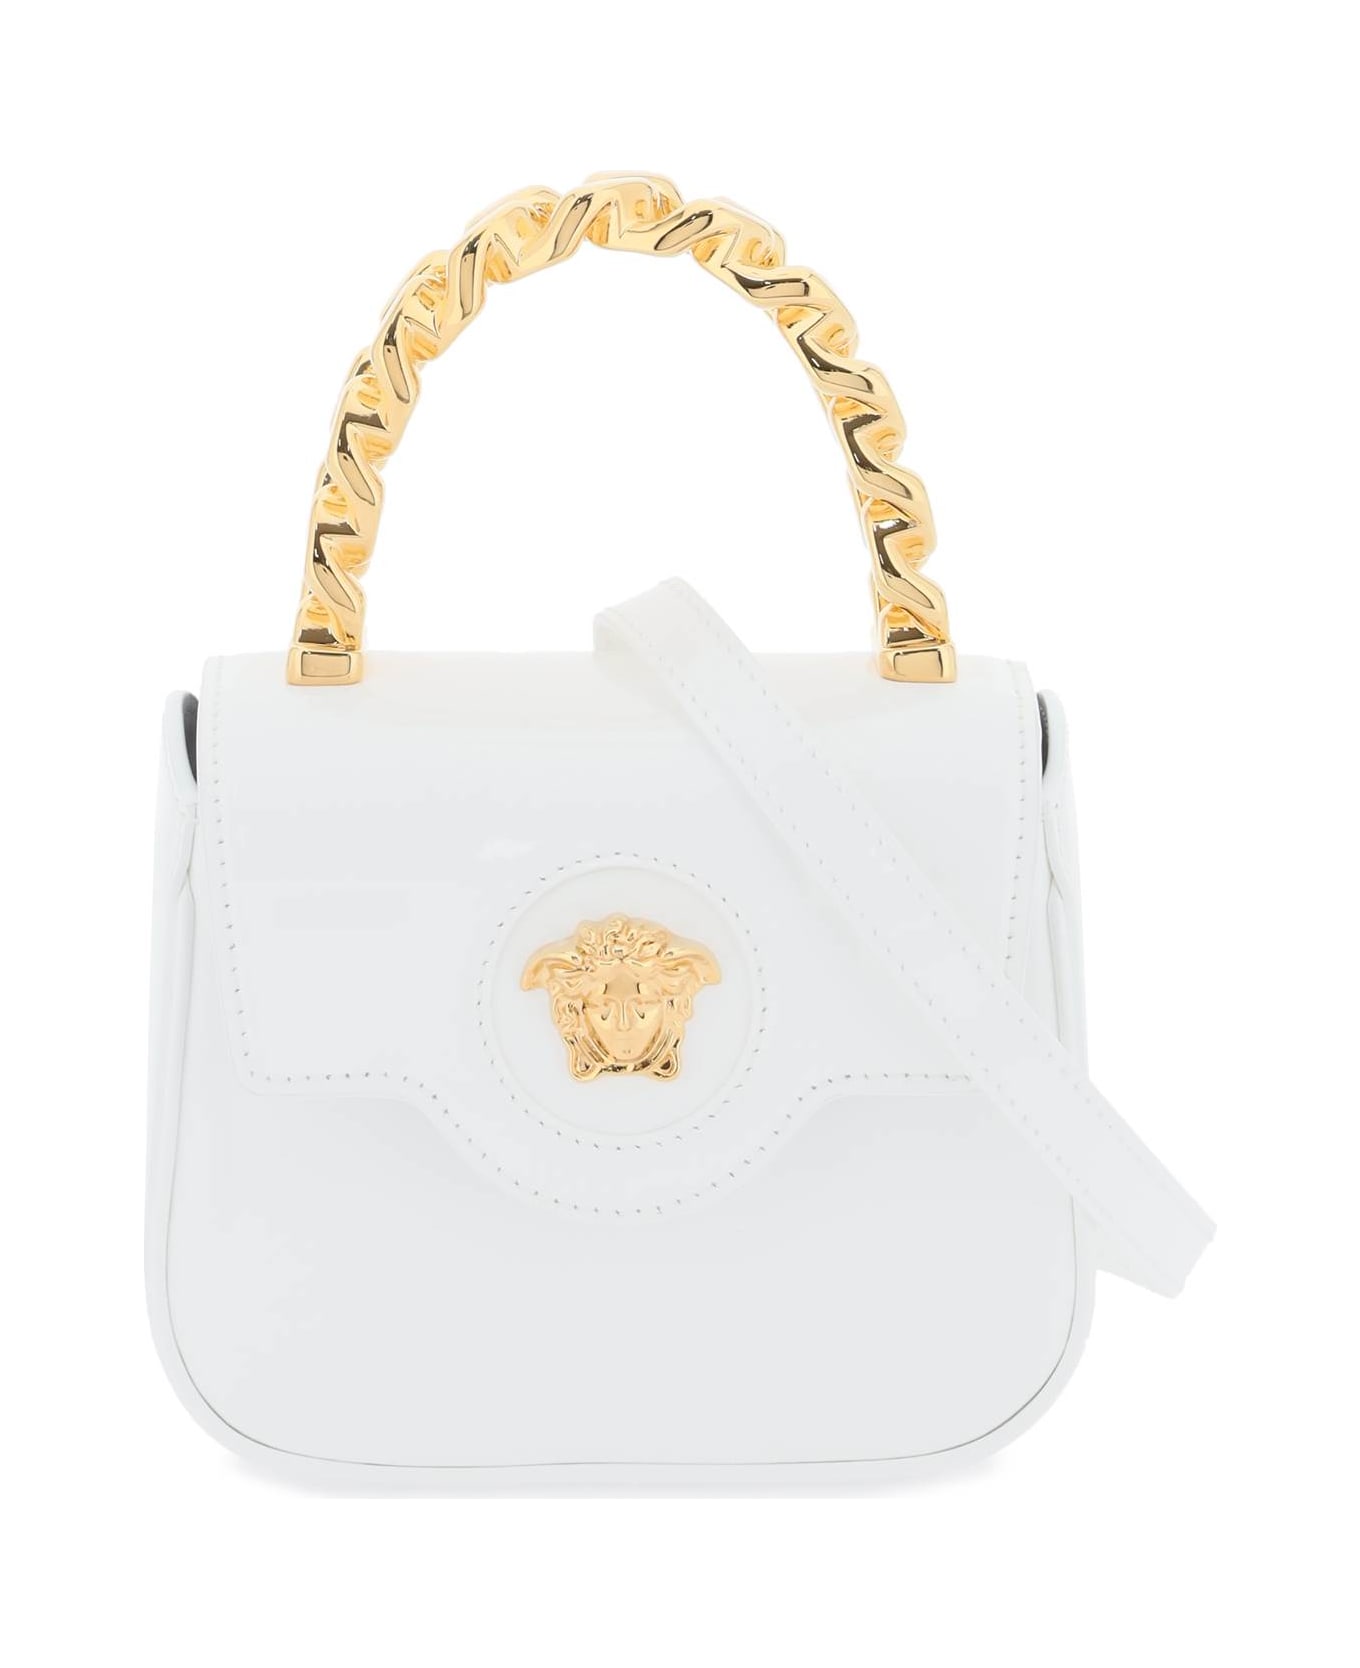 Versace White Patent Leather Bag - OPTICAL WHITE VERSACE GOL (White) トートバッグ